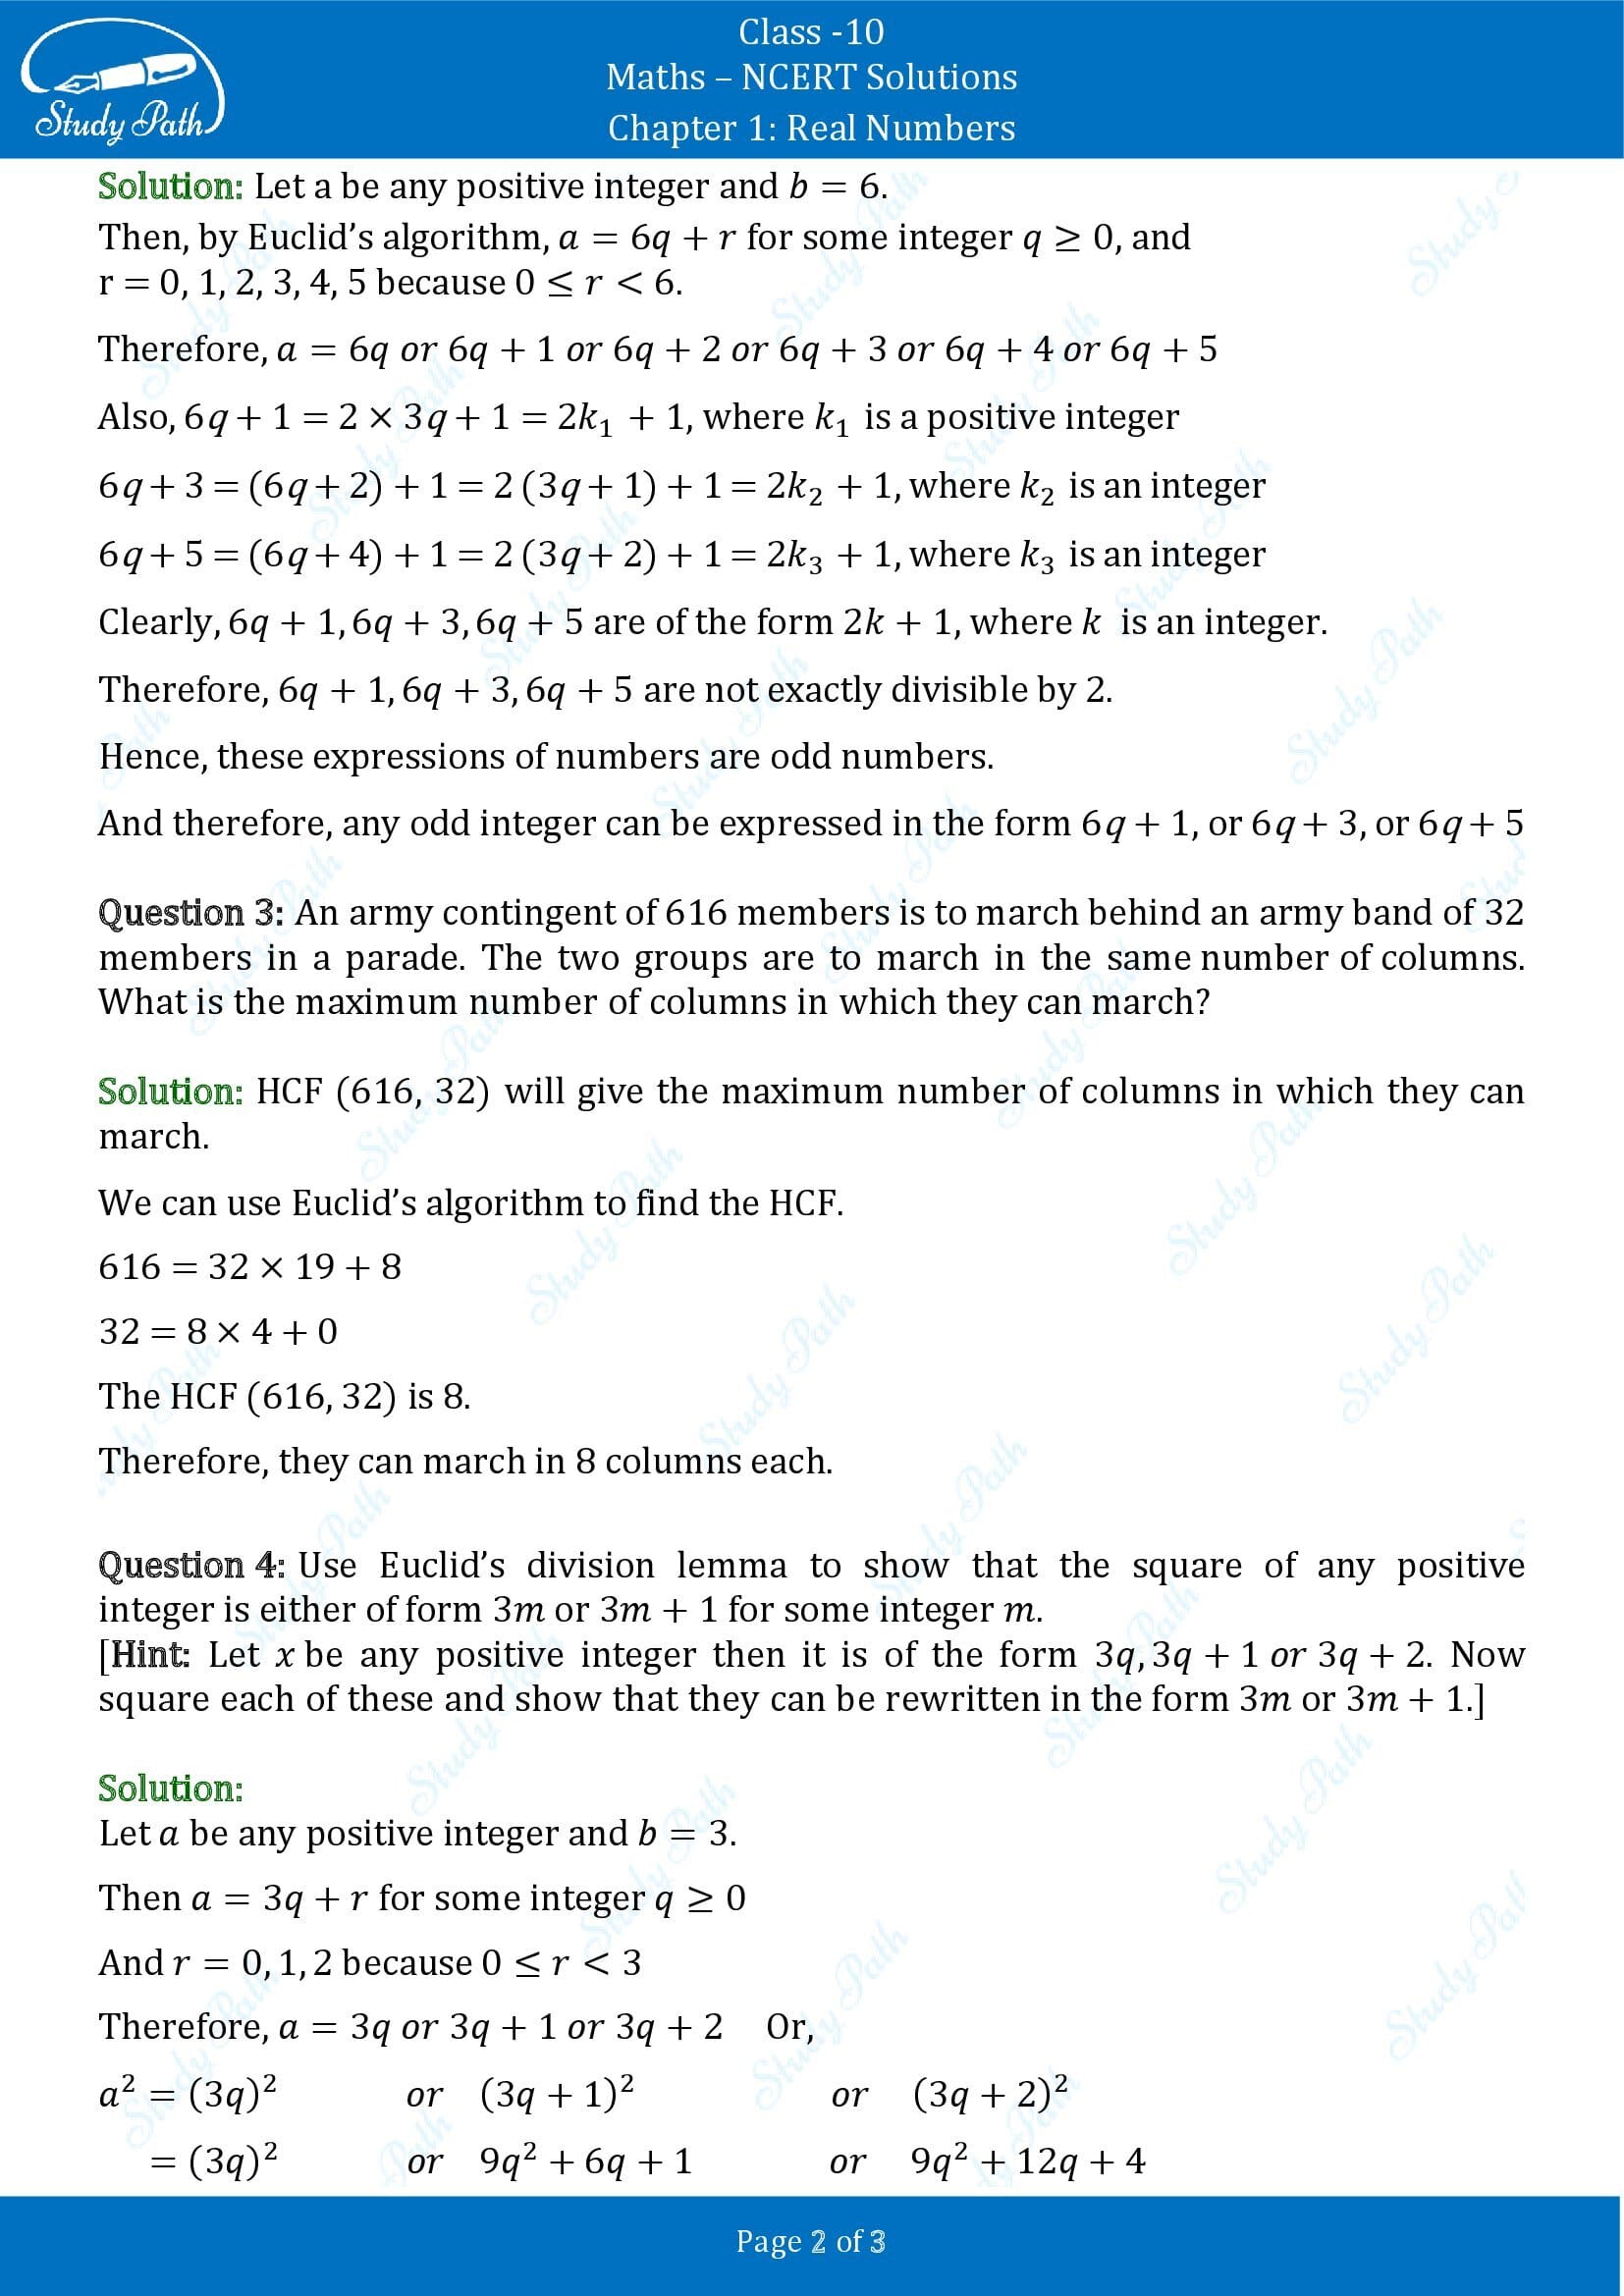 NCERT Solutions for Class 10 Maths Chapter 1 Real Numbers Exercise 1.1 00002